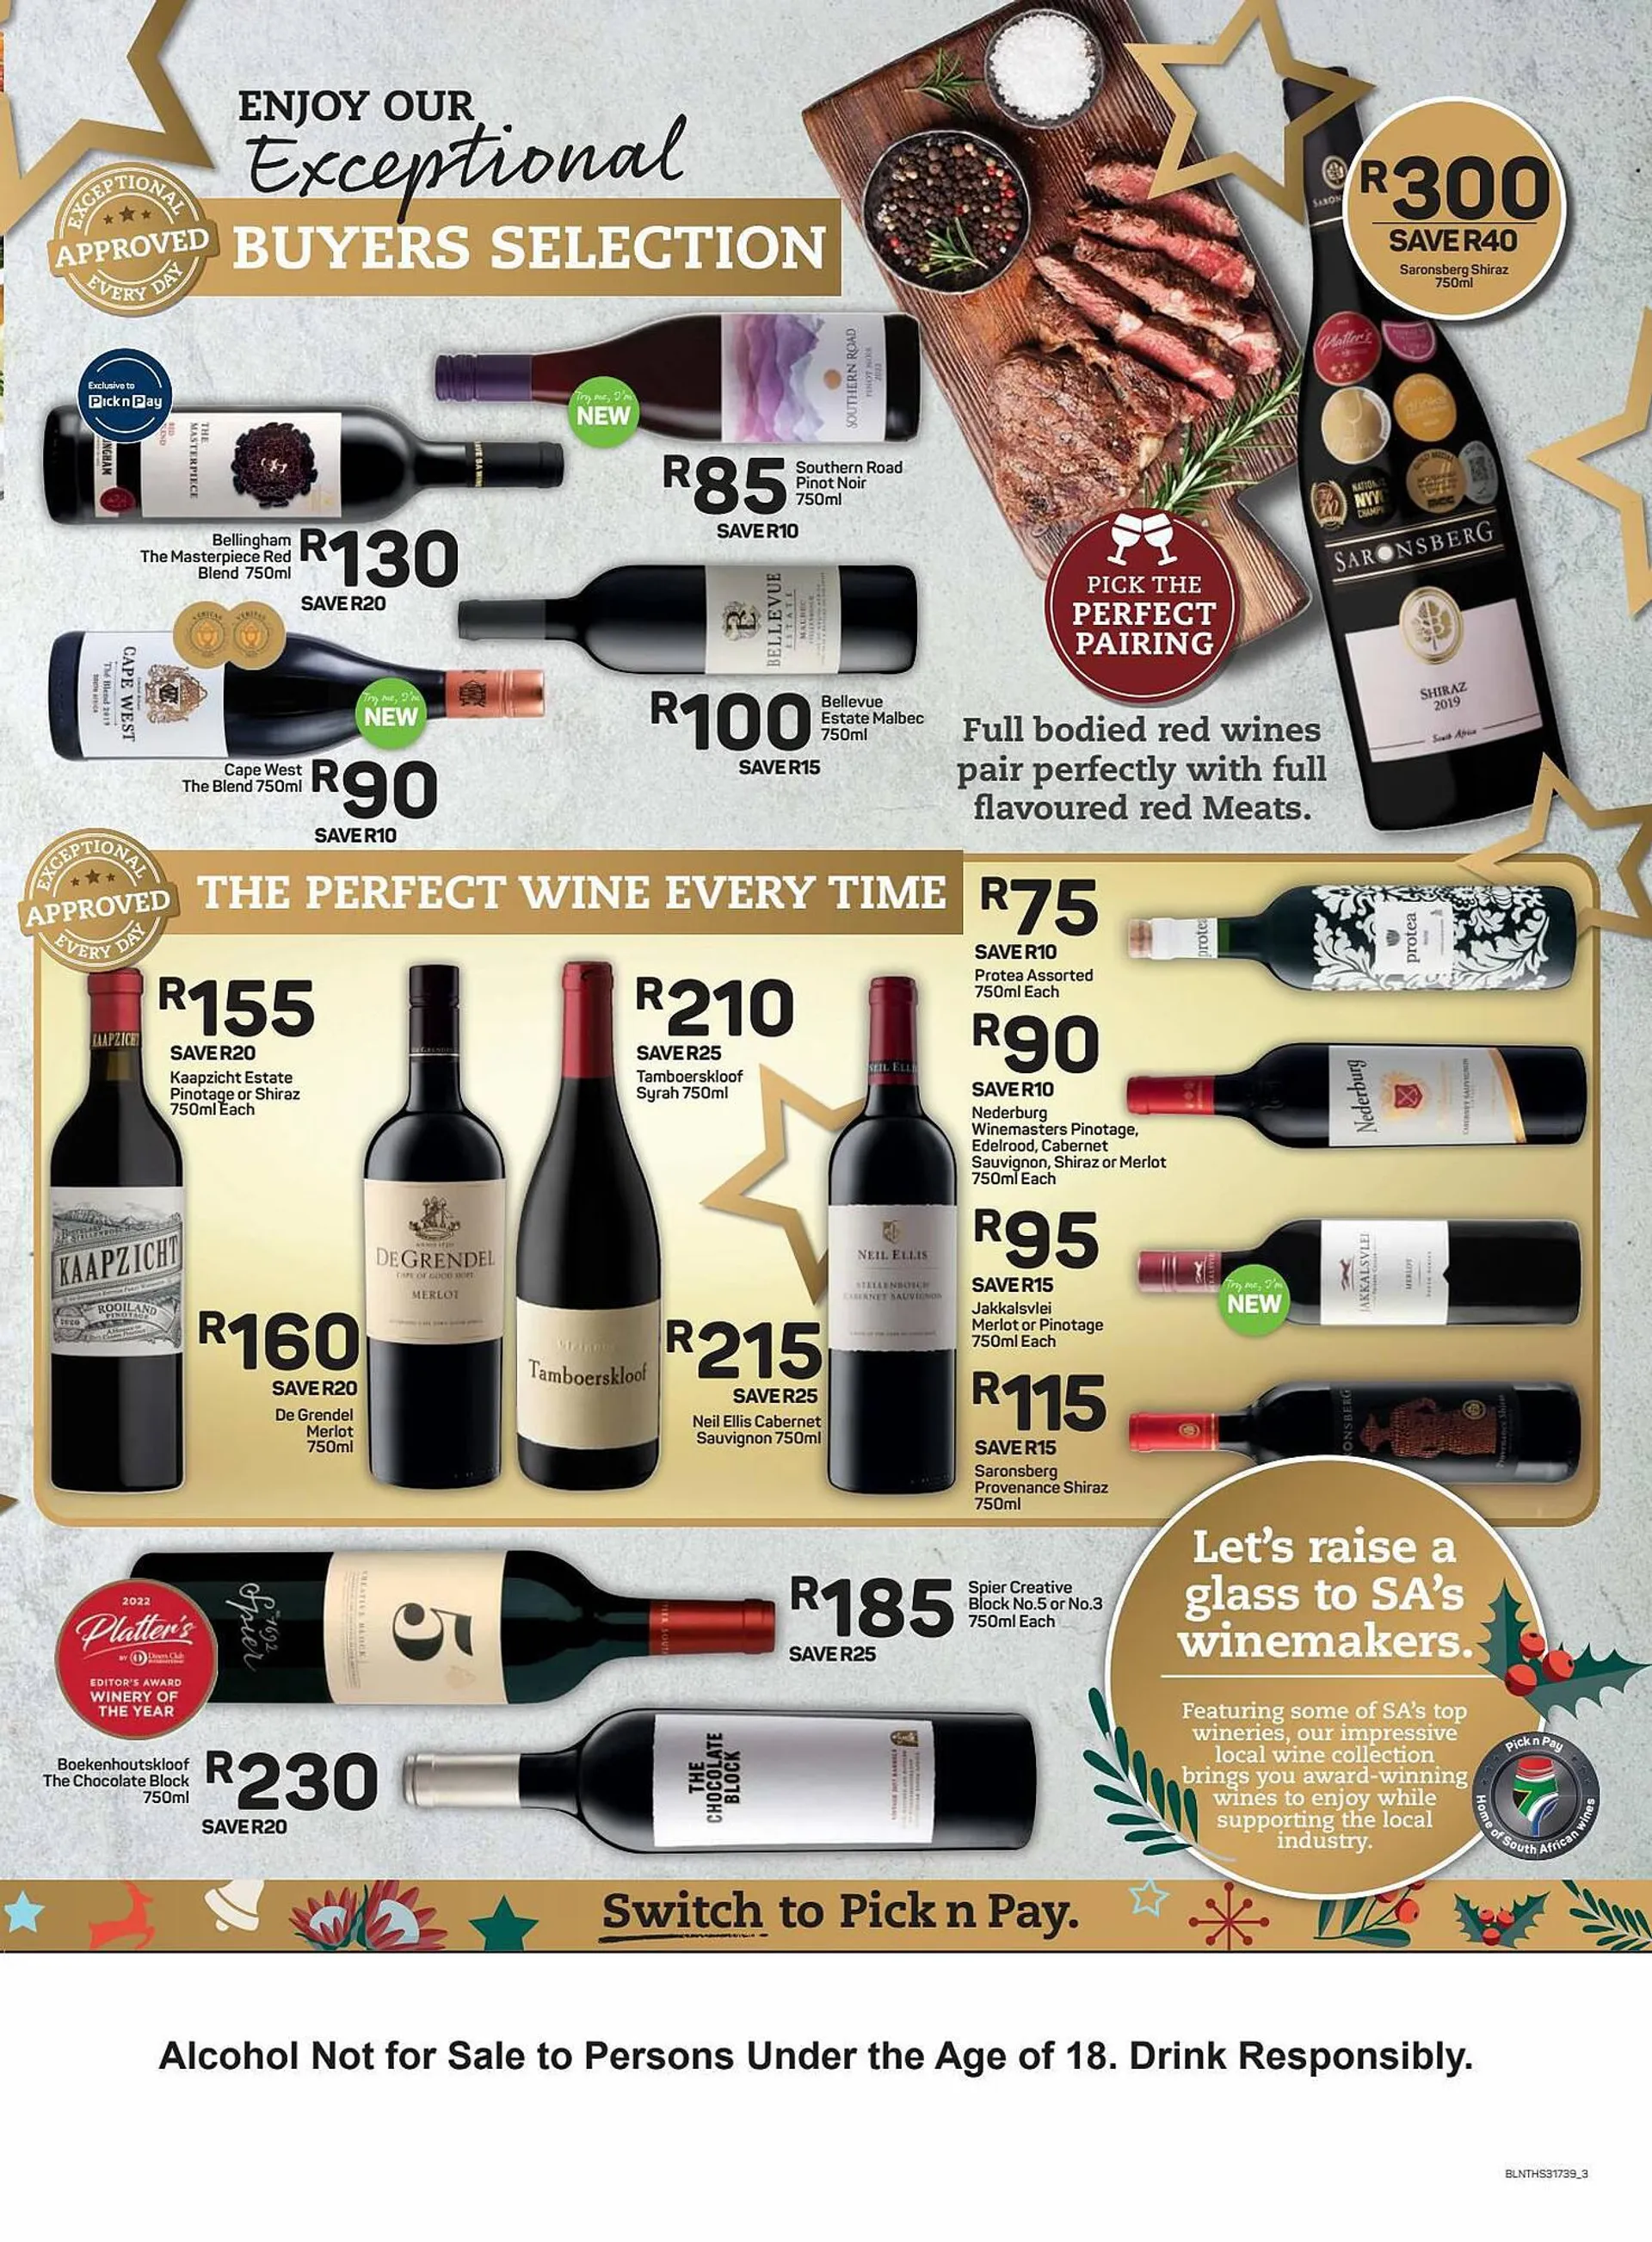 Pick n Pay catalogue - Wine guide - 3